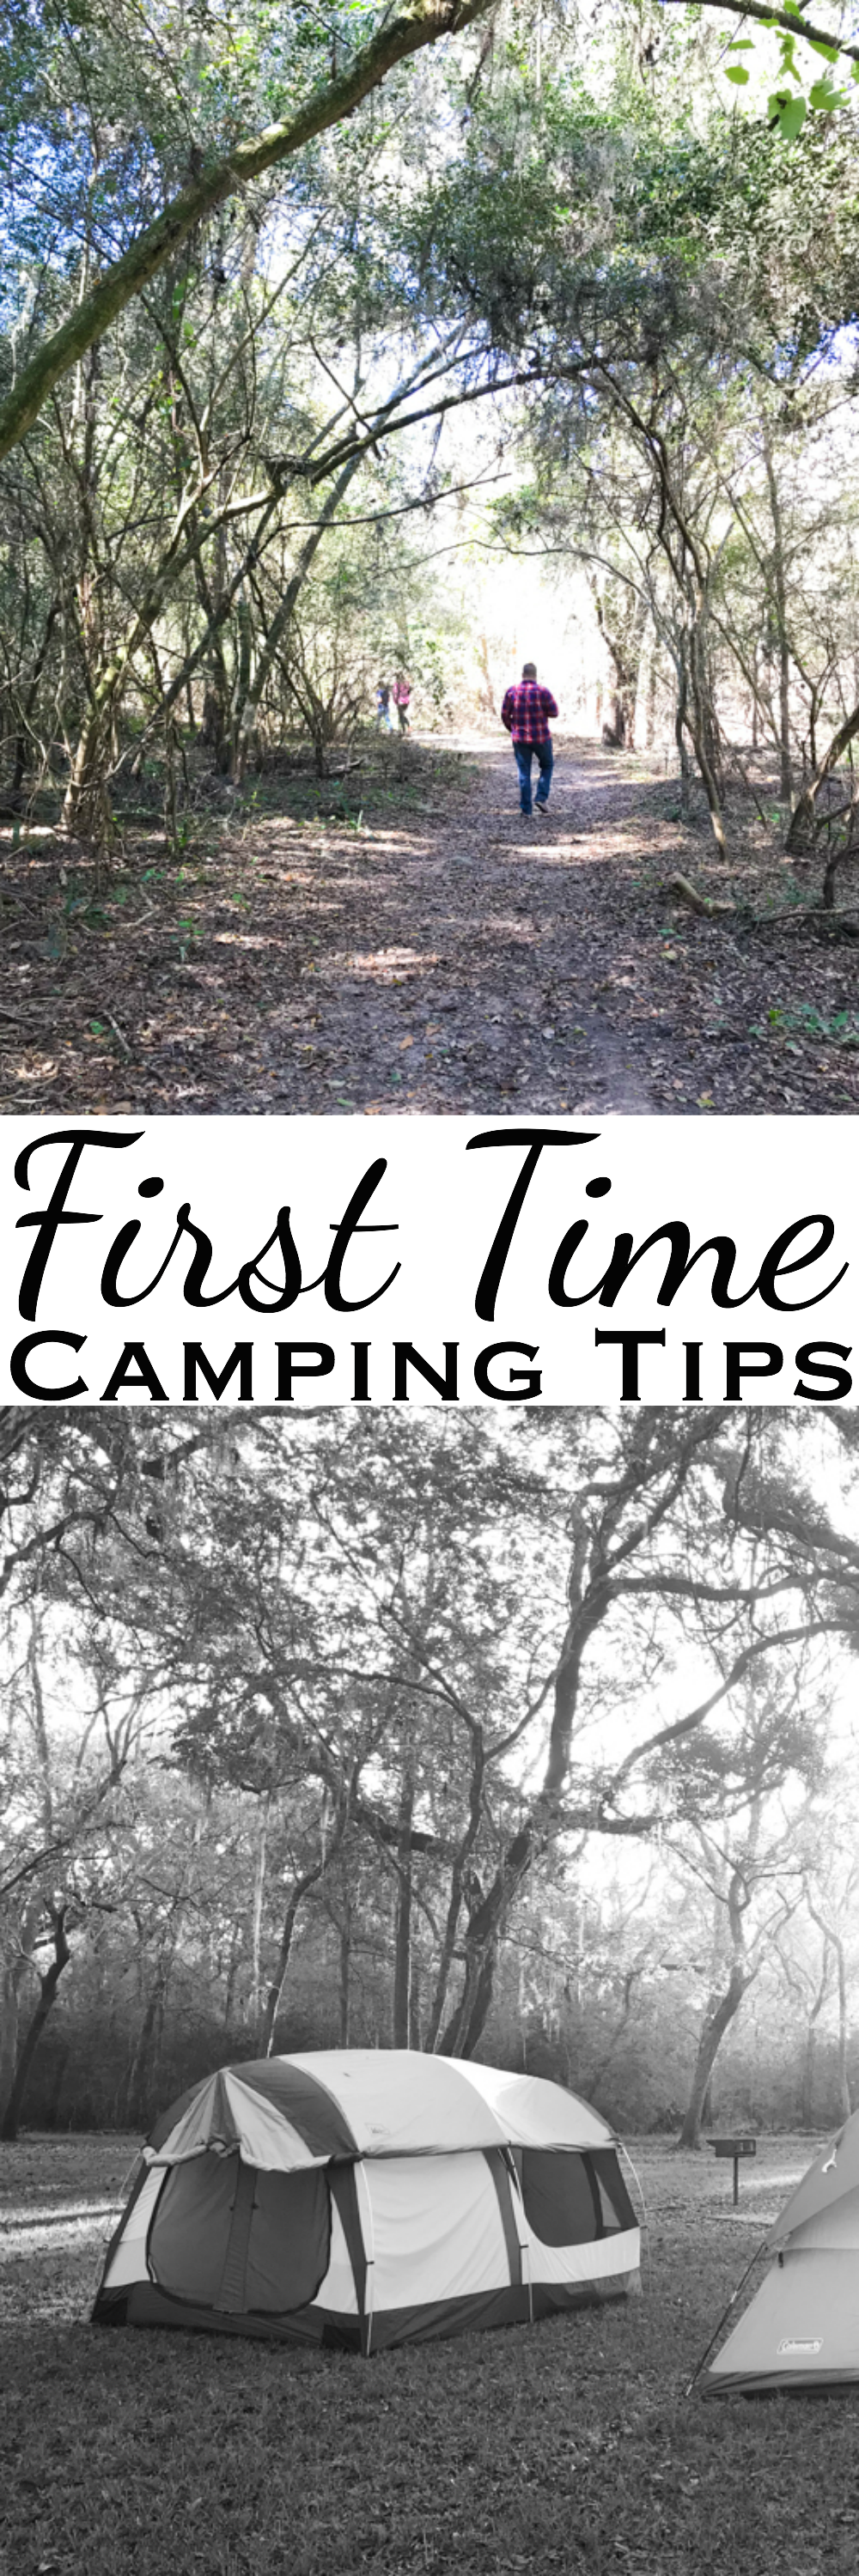 Going camping for the first time can be scary. To make the most of your experience, here are some first time camping tips.